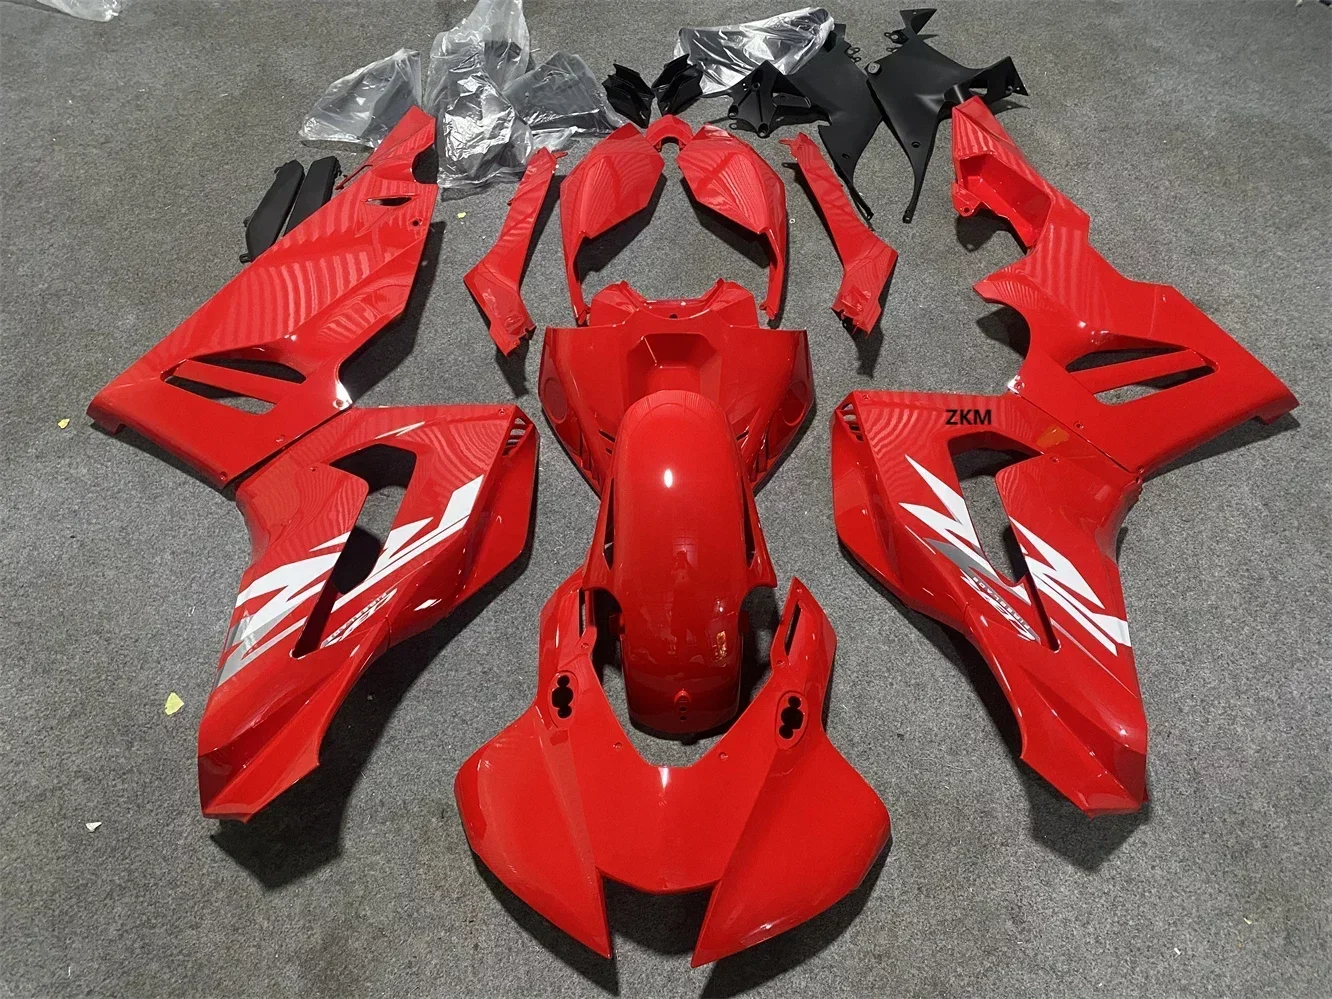 

Fairings Kit Fit For CBR1000RR-R 2020 2021 2022 Bodywork Set 20 21 22 High Quality Injection red